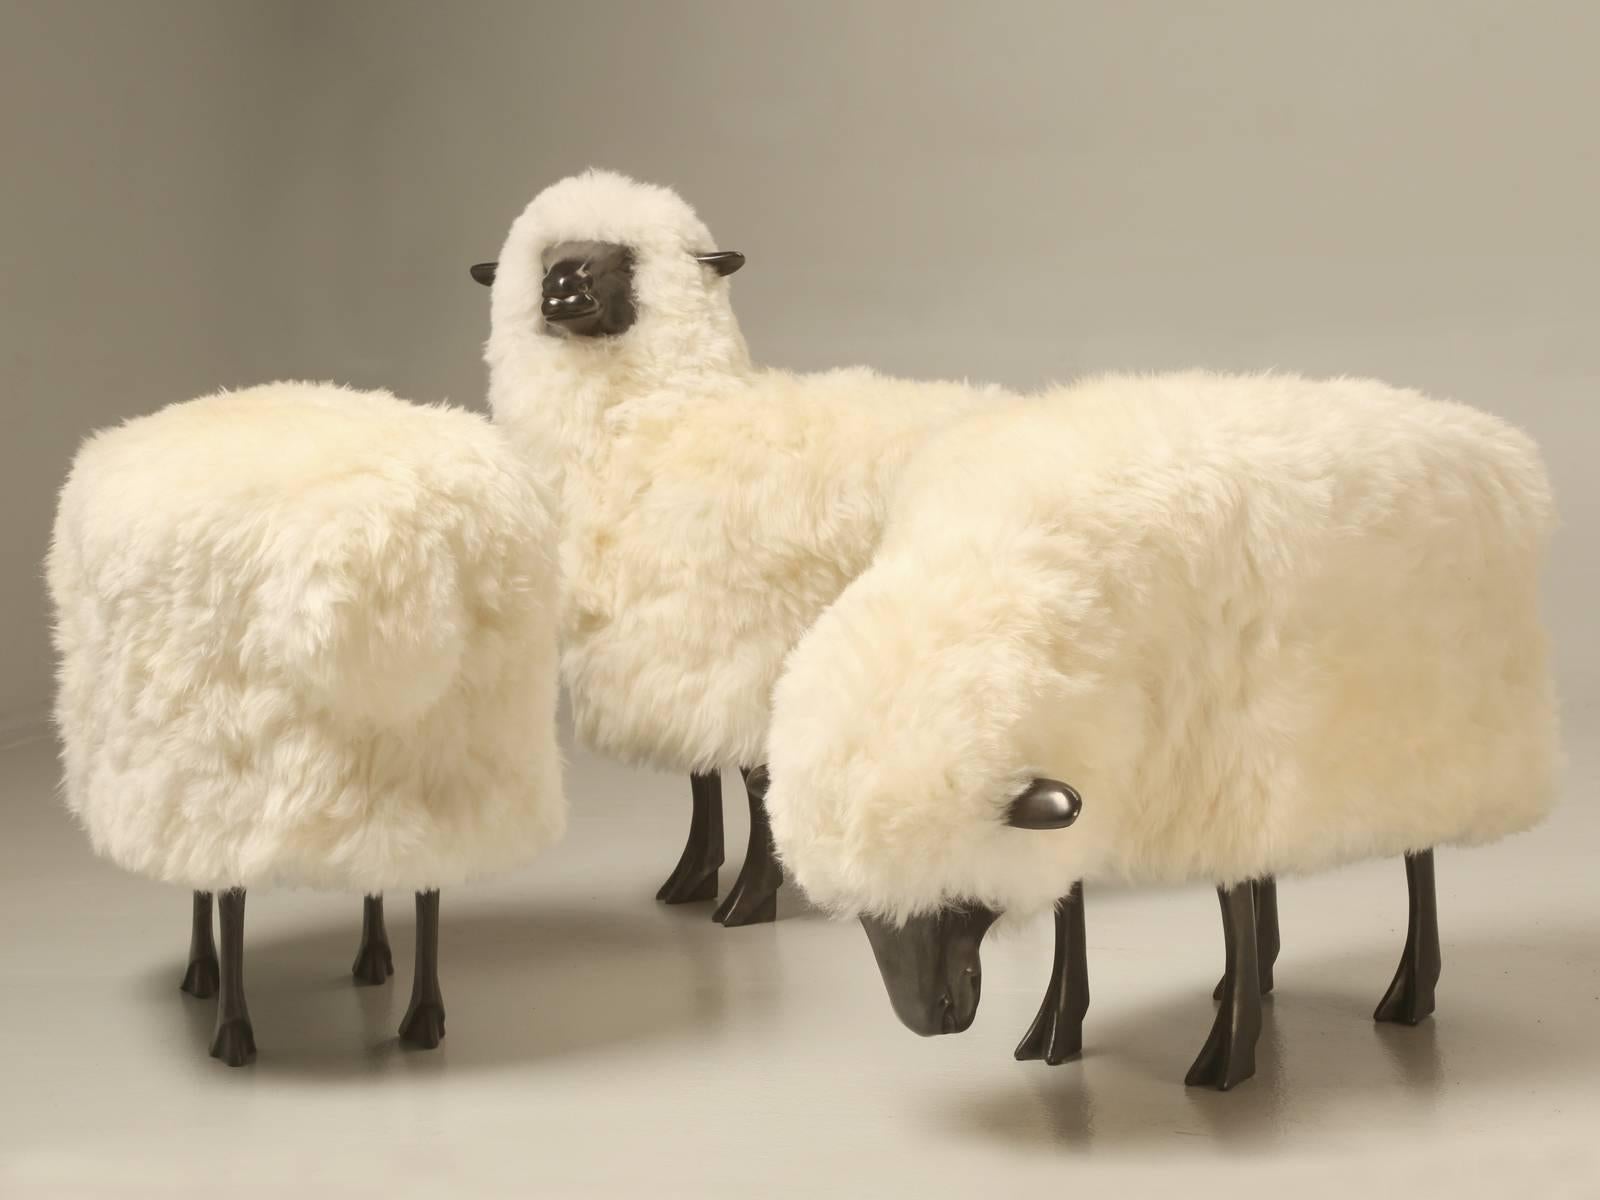 We feel privileged to be able to present these two new Sheep, to the Old Plank Sheep Collection, one you will notice is posed in a grazing position, while the other has its head cocked, or canted to the left. 